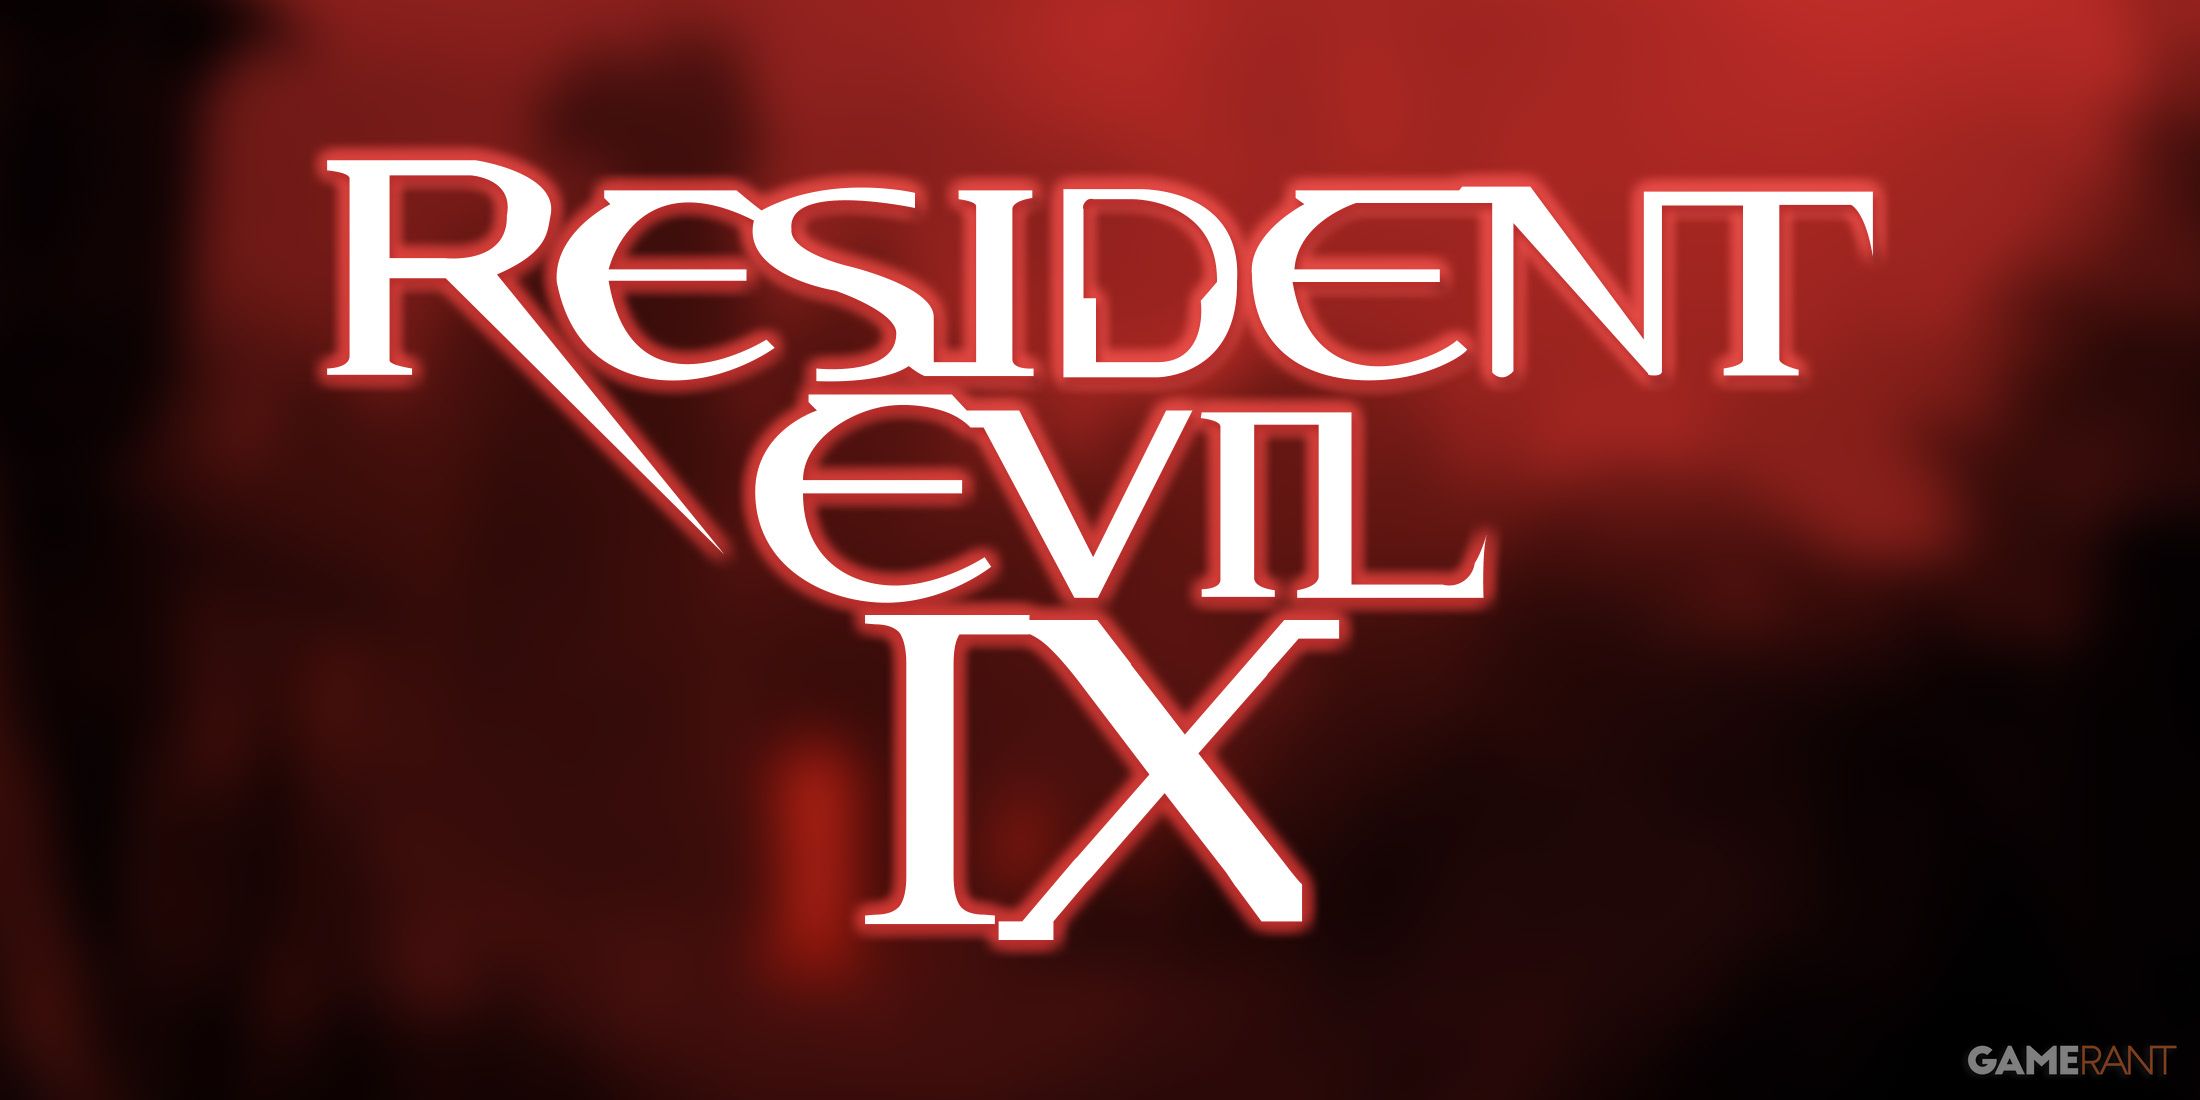 Resident Evil 9 IX mockup logo on red-tinted and blurry RE4 remake village background